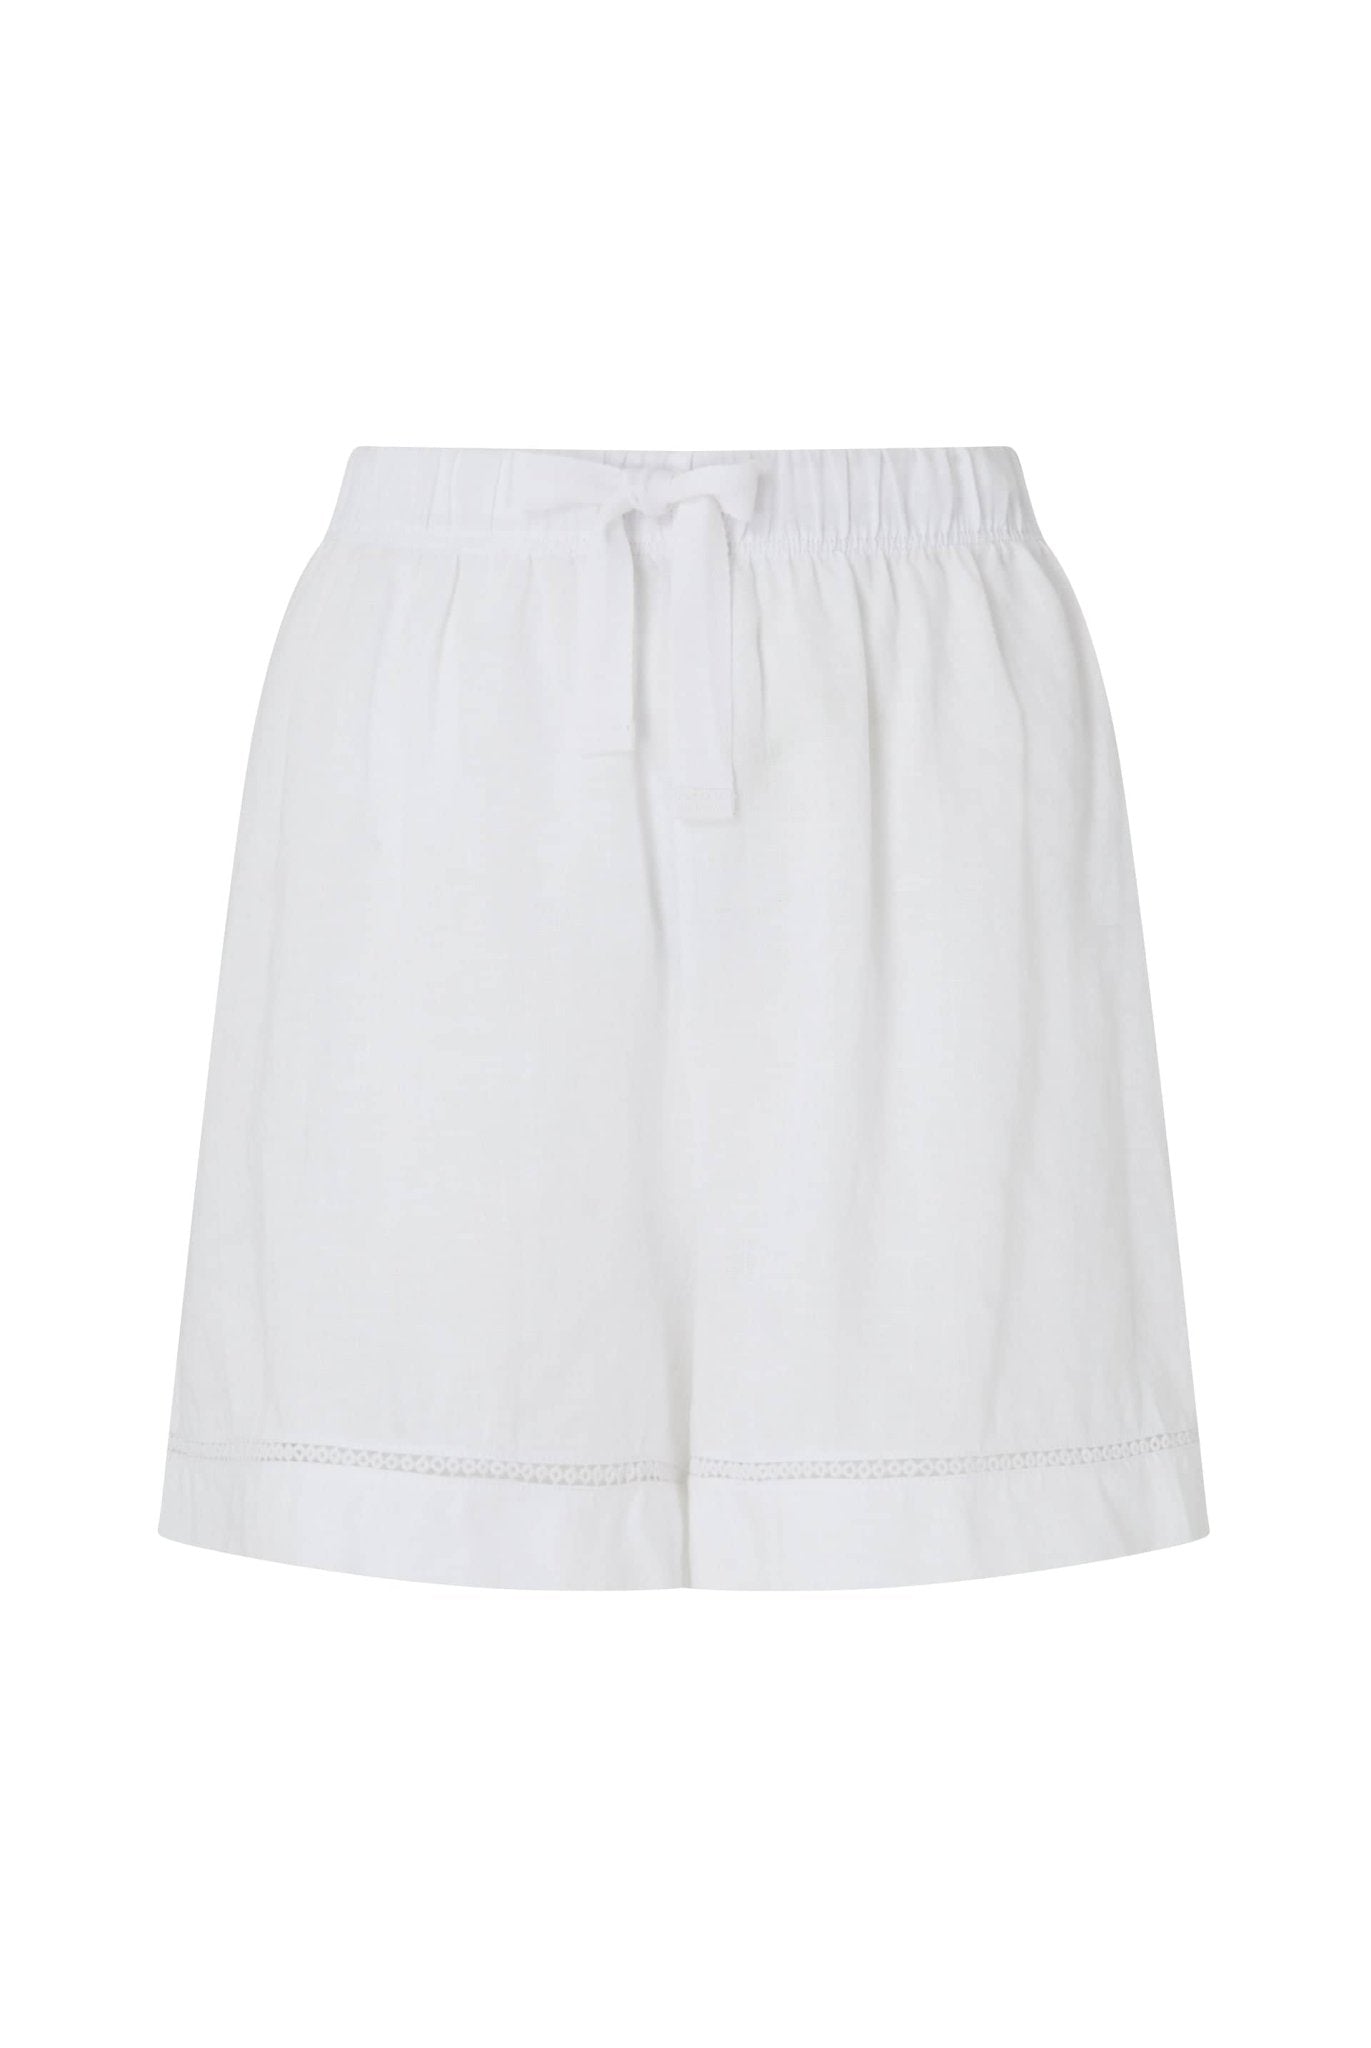 South Sands Short Sleeve and Shorts Set in White - Heidi Klein - UK Store